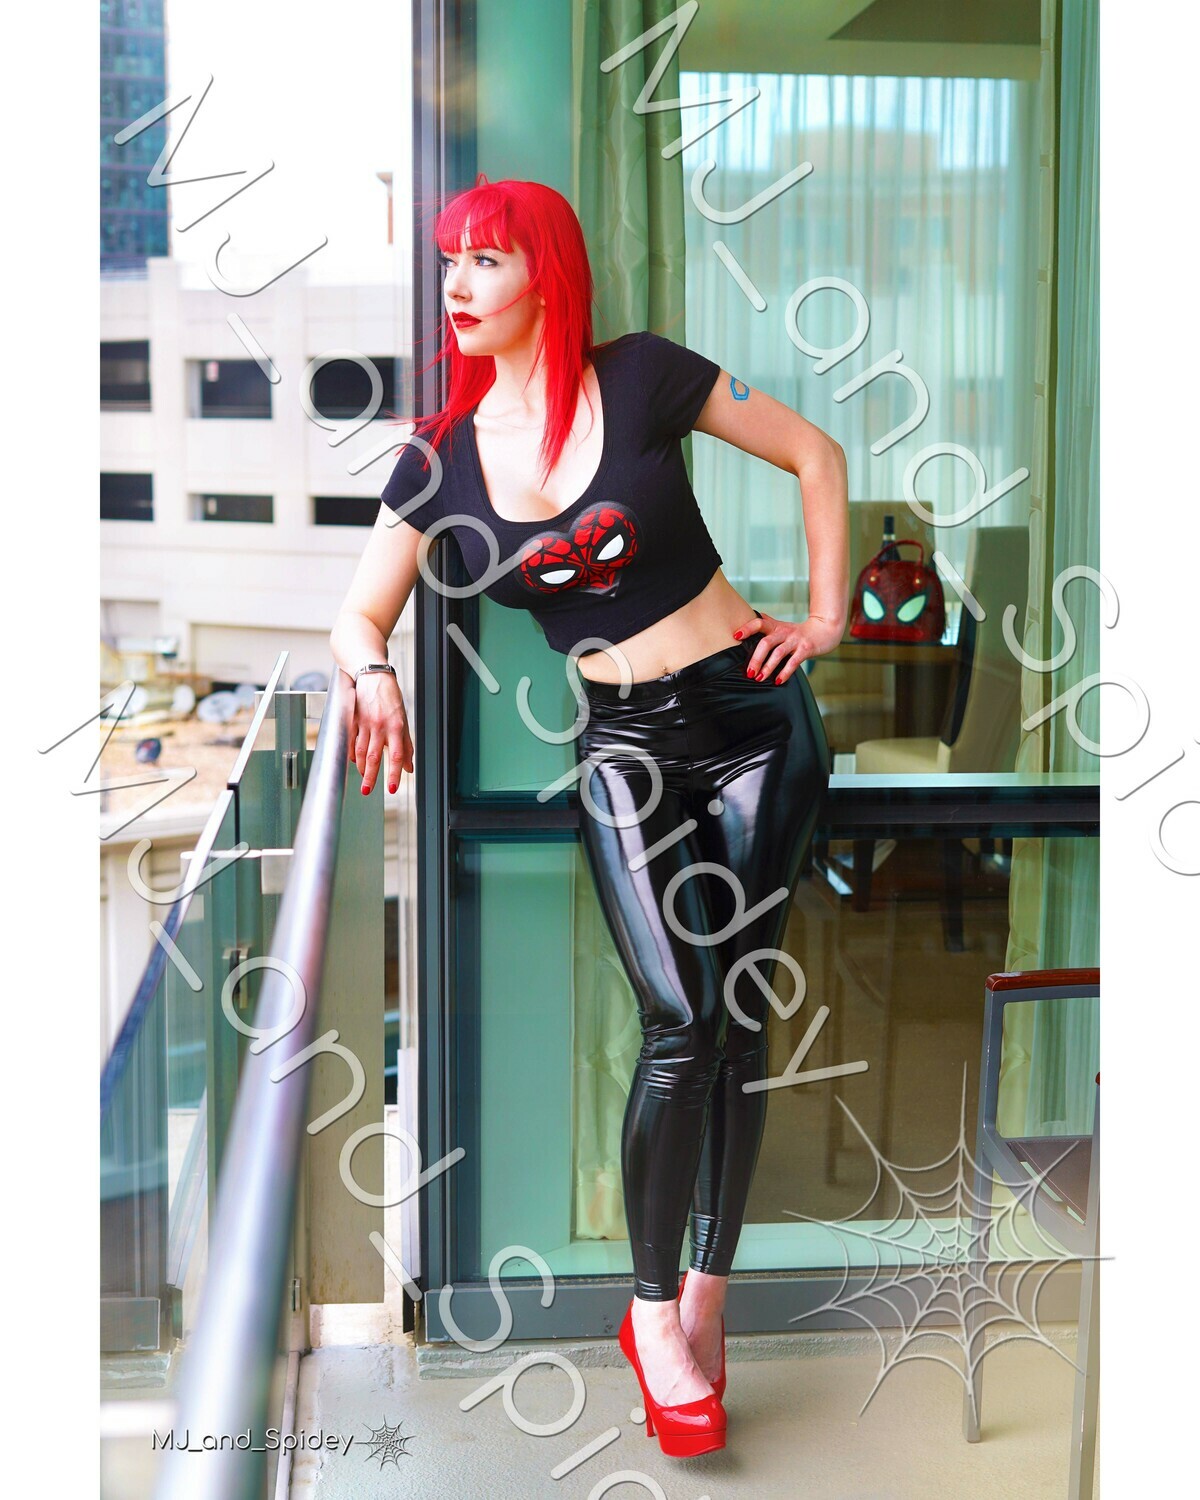 Marvel - Spider-Man - Mary Jane Watson - Classic 16 - Digital Cosplay Image (@MJ_and_Spidey, MJ and Spidey, Comics)